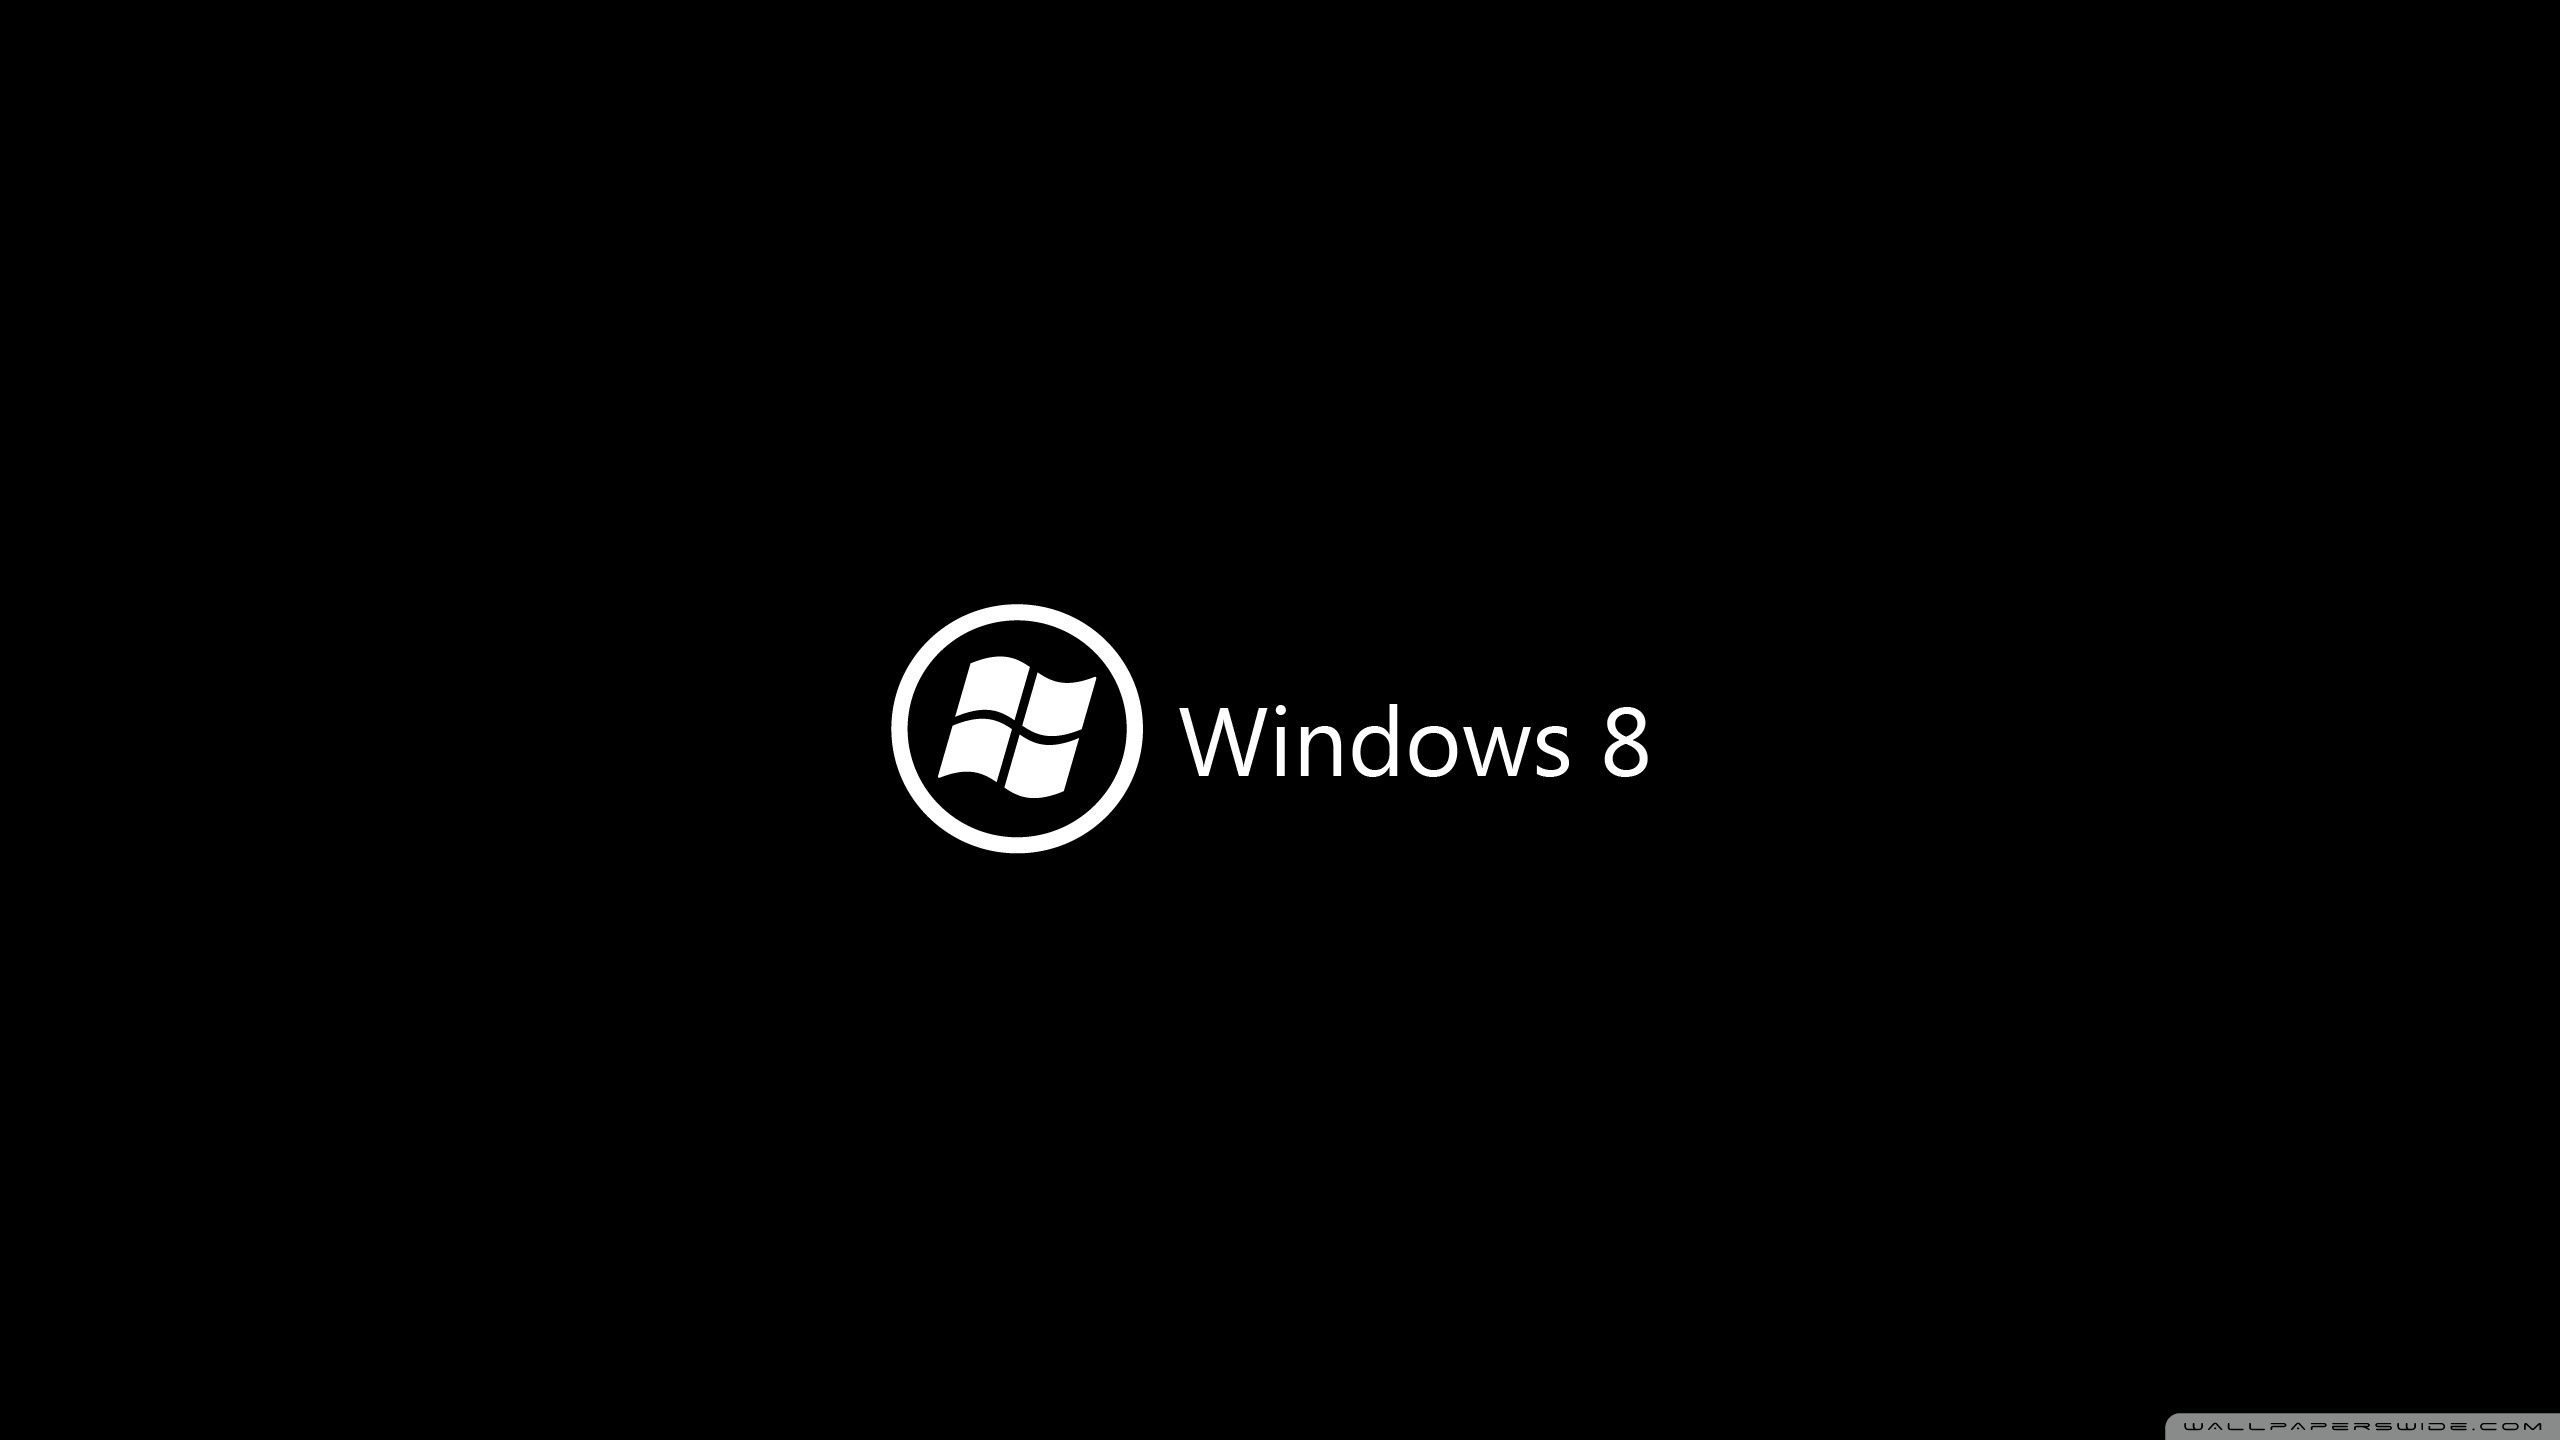 Windows 8 black minmal theme wallpapers and images - wallpapers